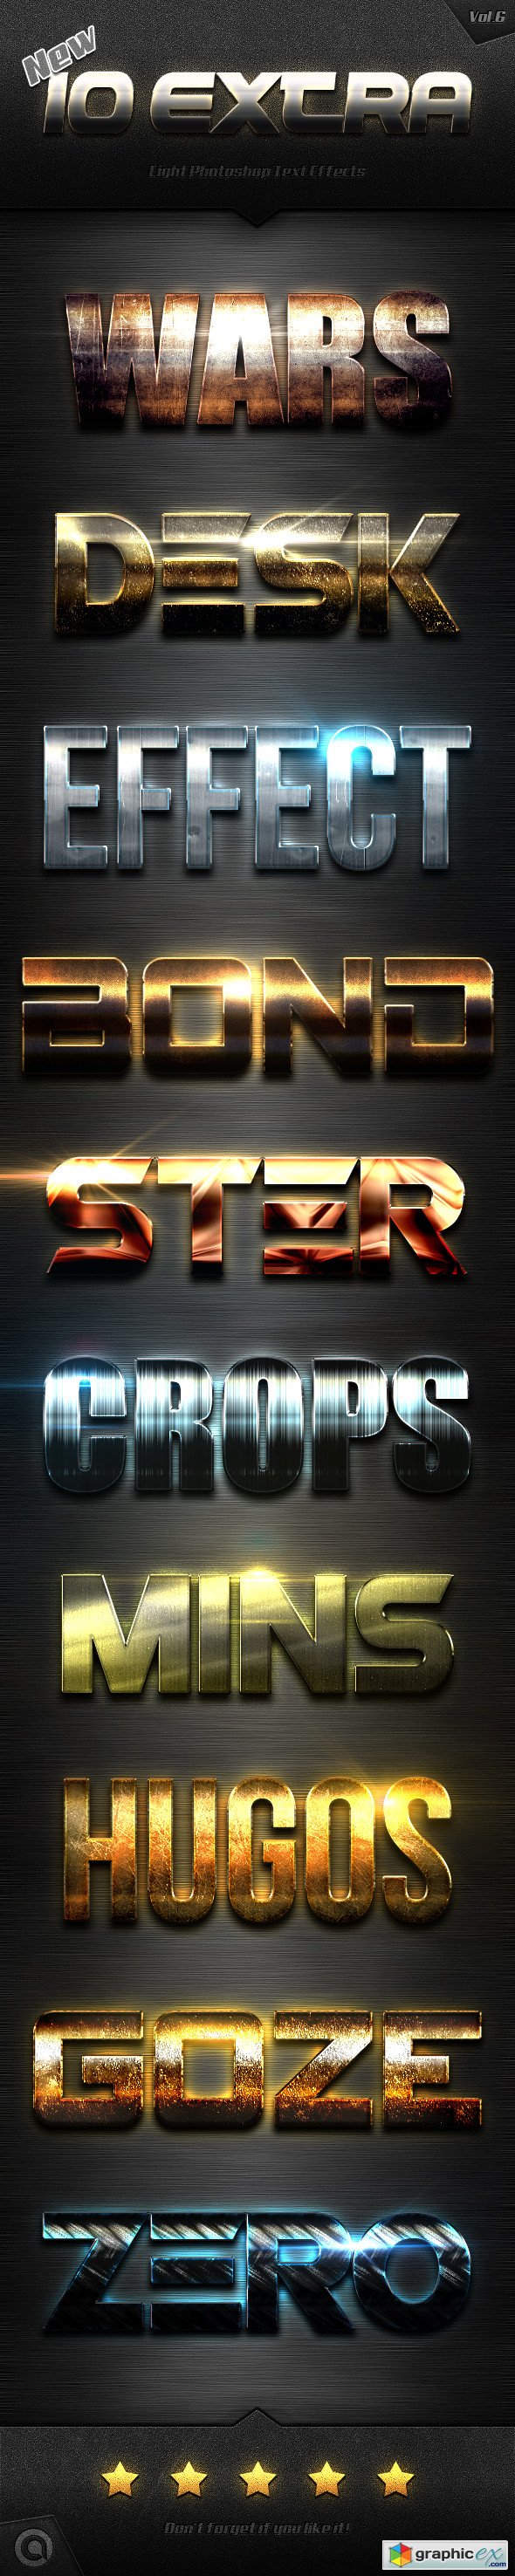 New 10 Extra Light Text Effects Vol.6